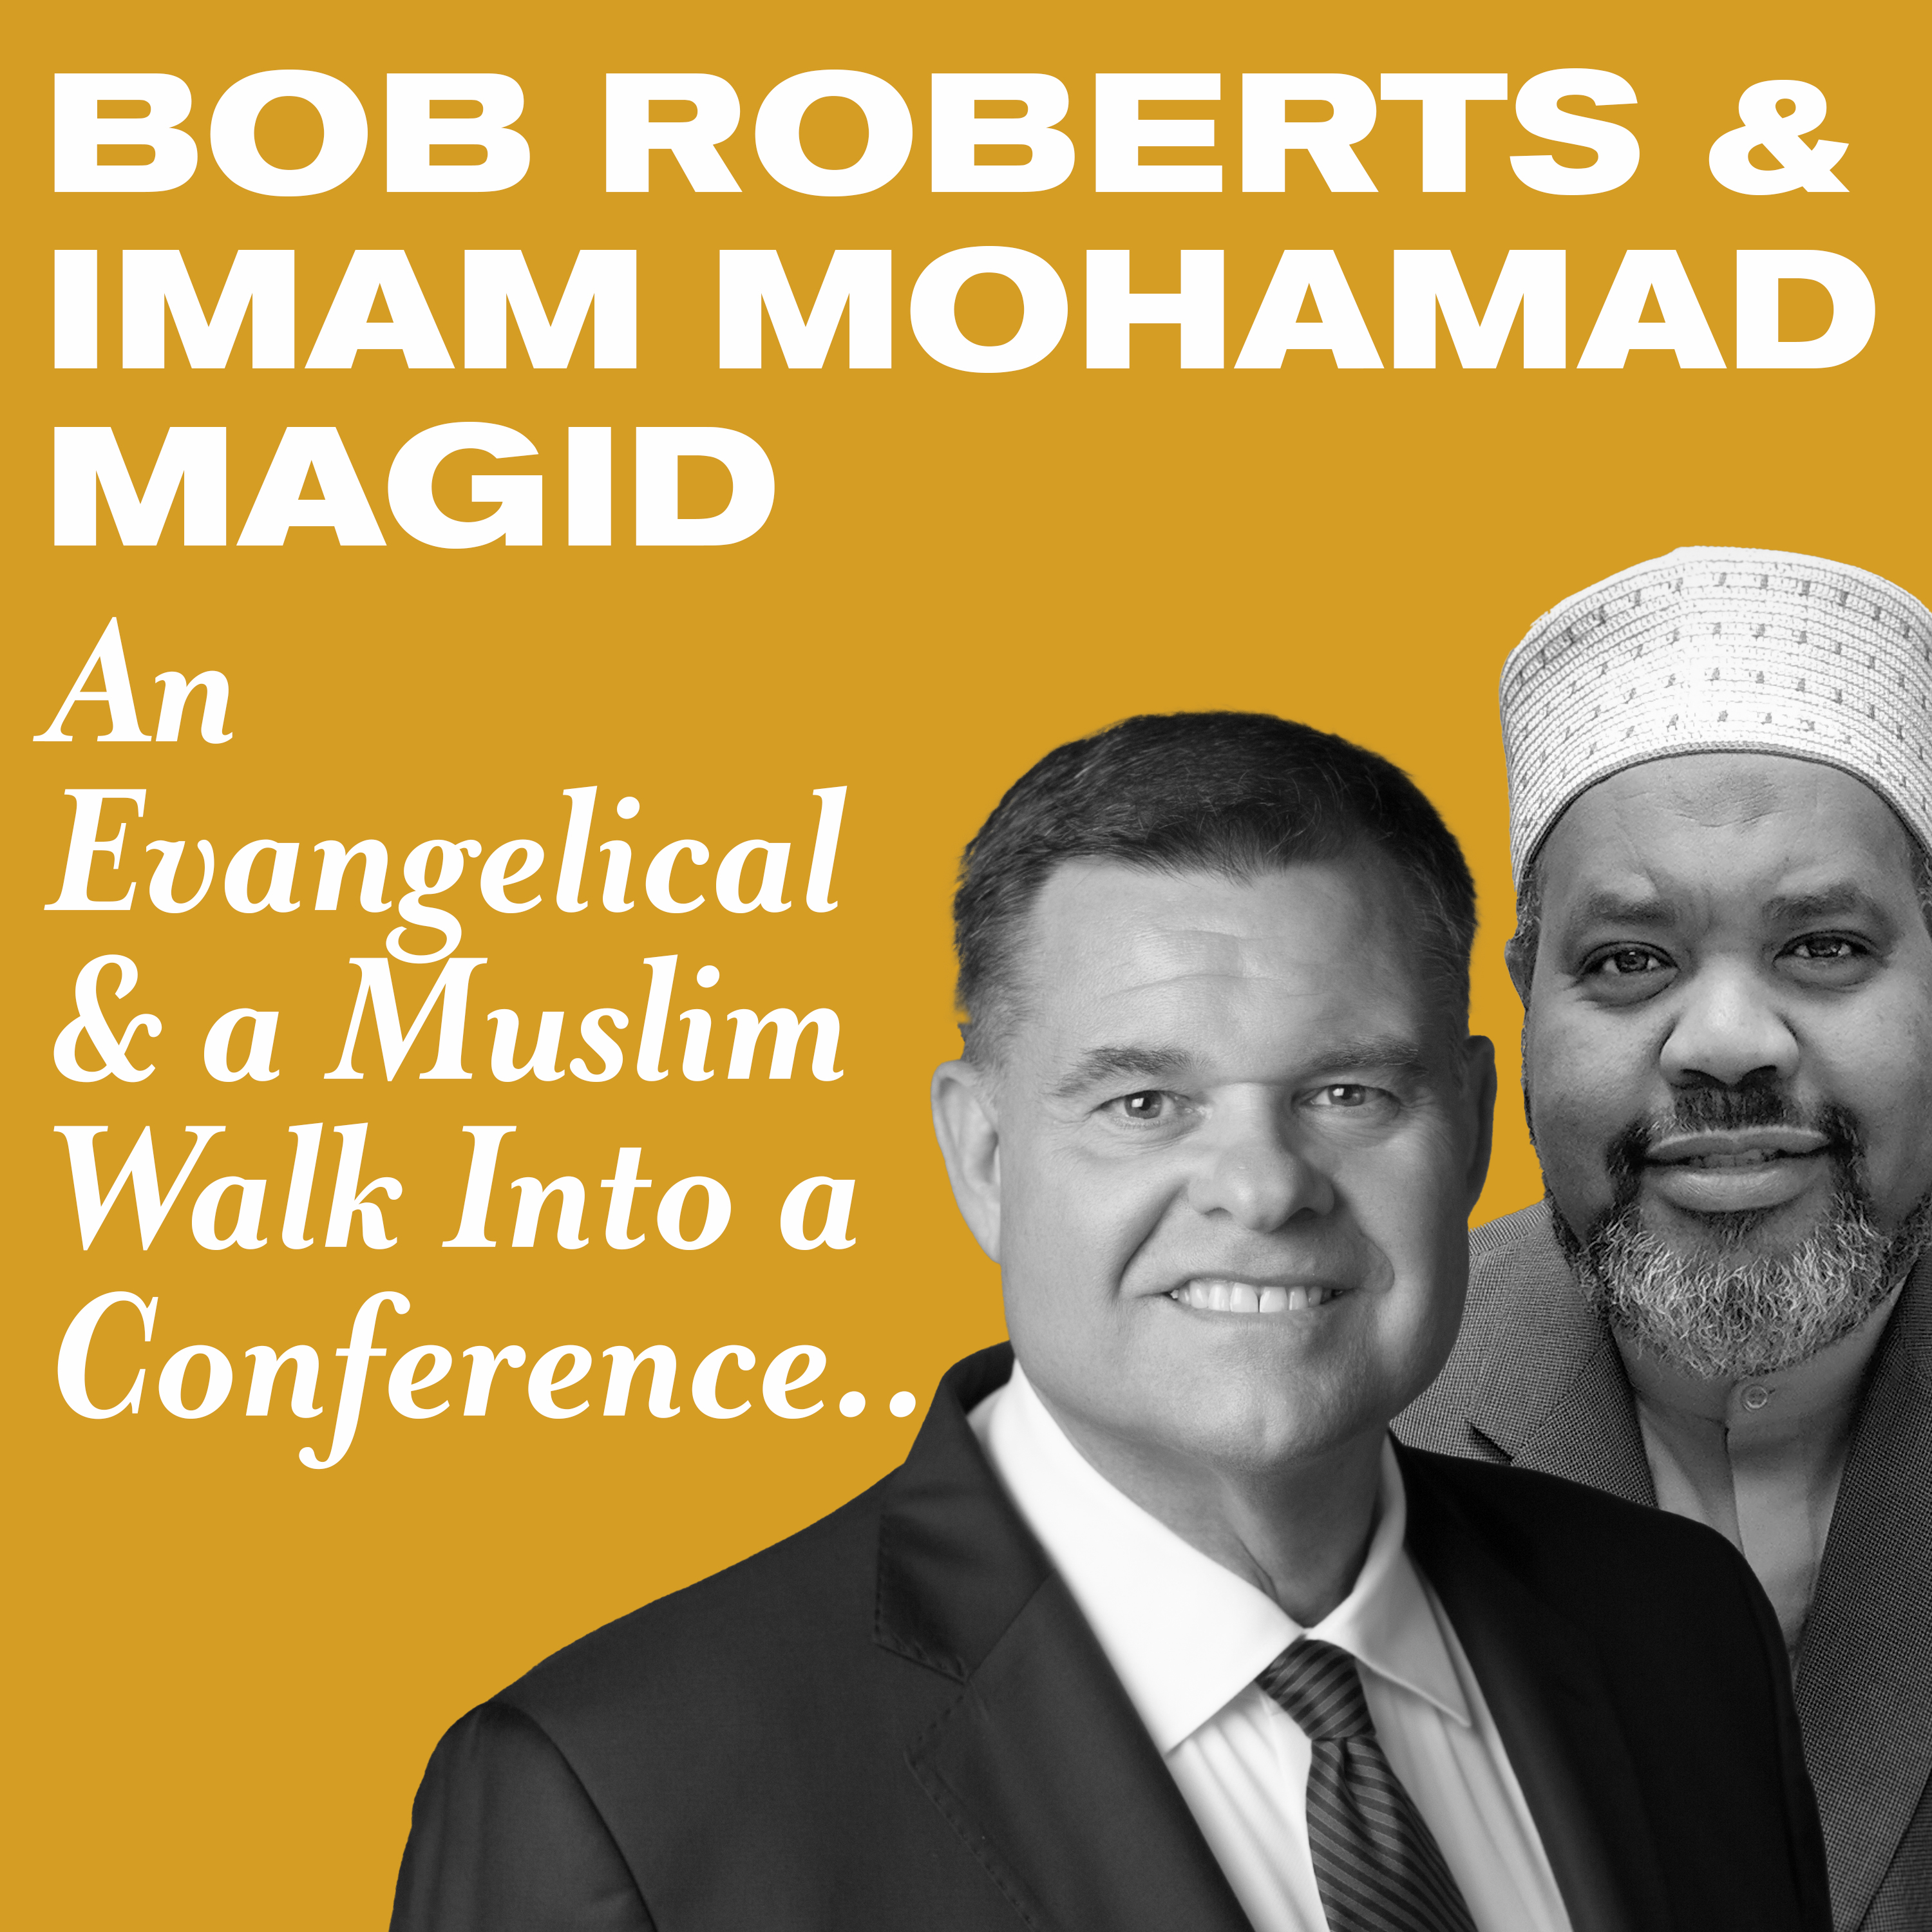 An Evangelical and a Muslim Walk Into a Conference...